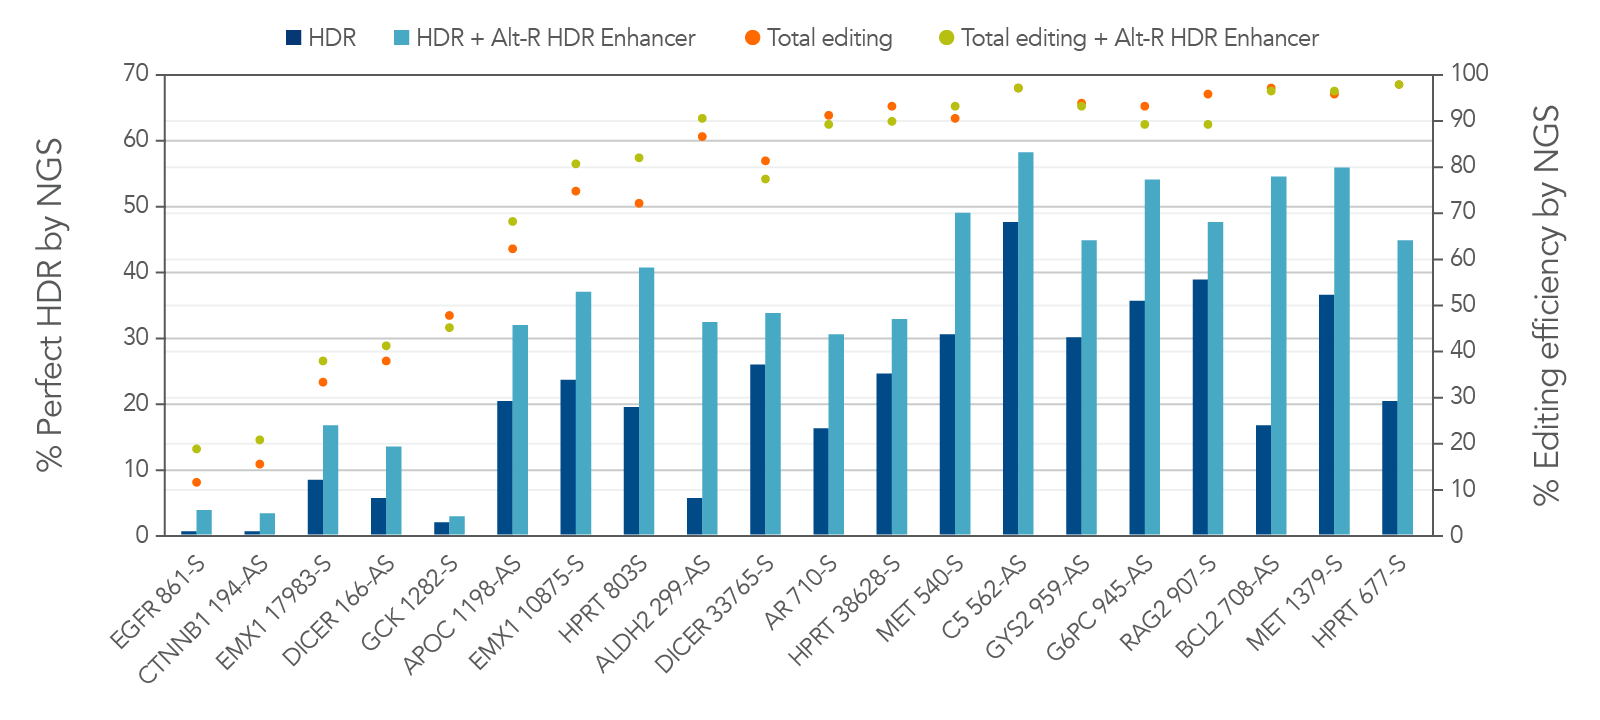 Alt-R HDR Enhancer improves the rate of perfect HDR with 2PS-modified donor Ultramer oligos.